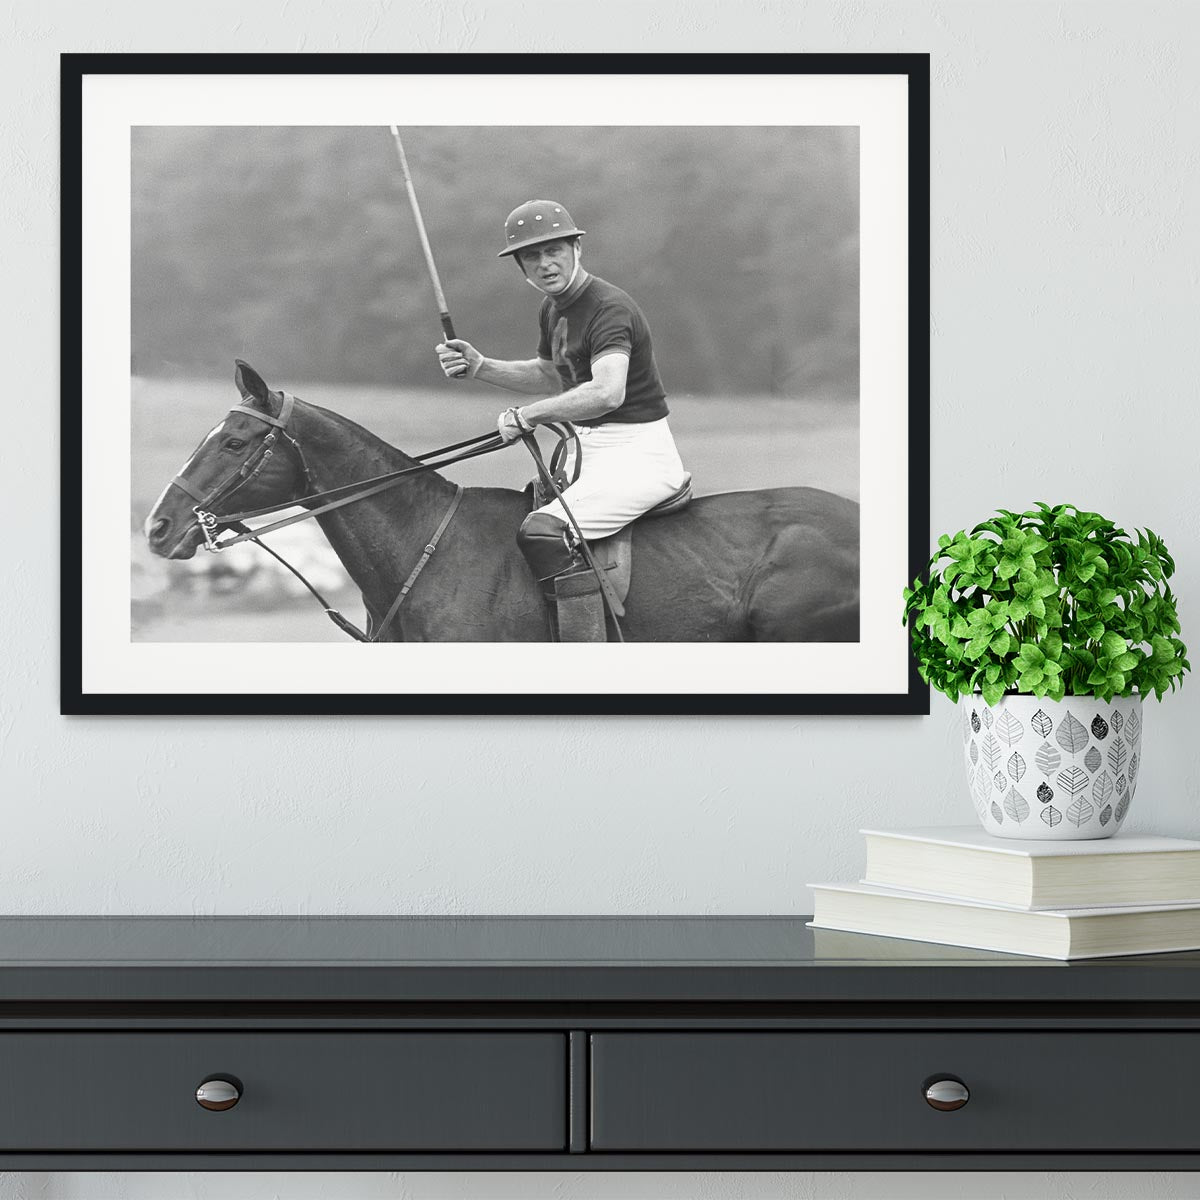 Prince Philip shown winning the polo Gold Cup Framed Print - Canvas Art Rocks - 1